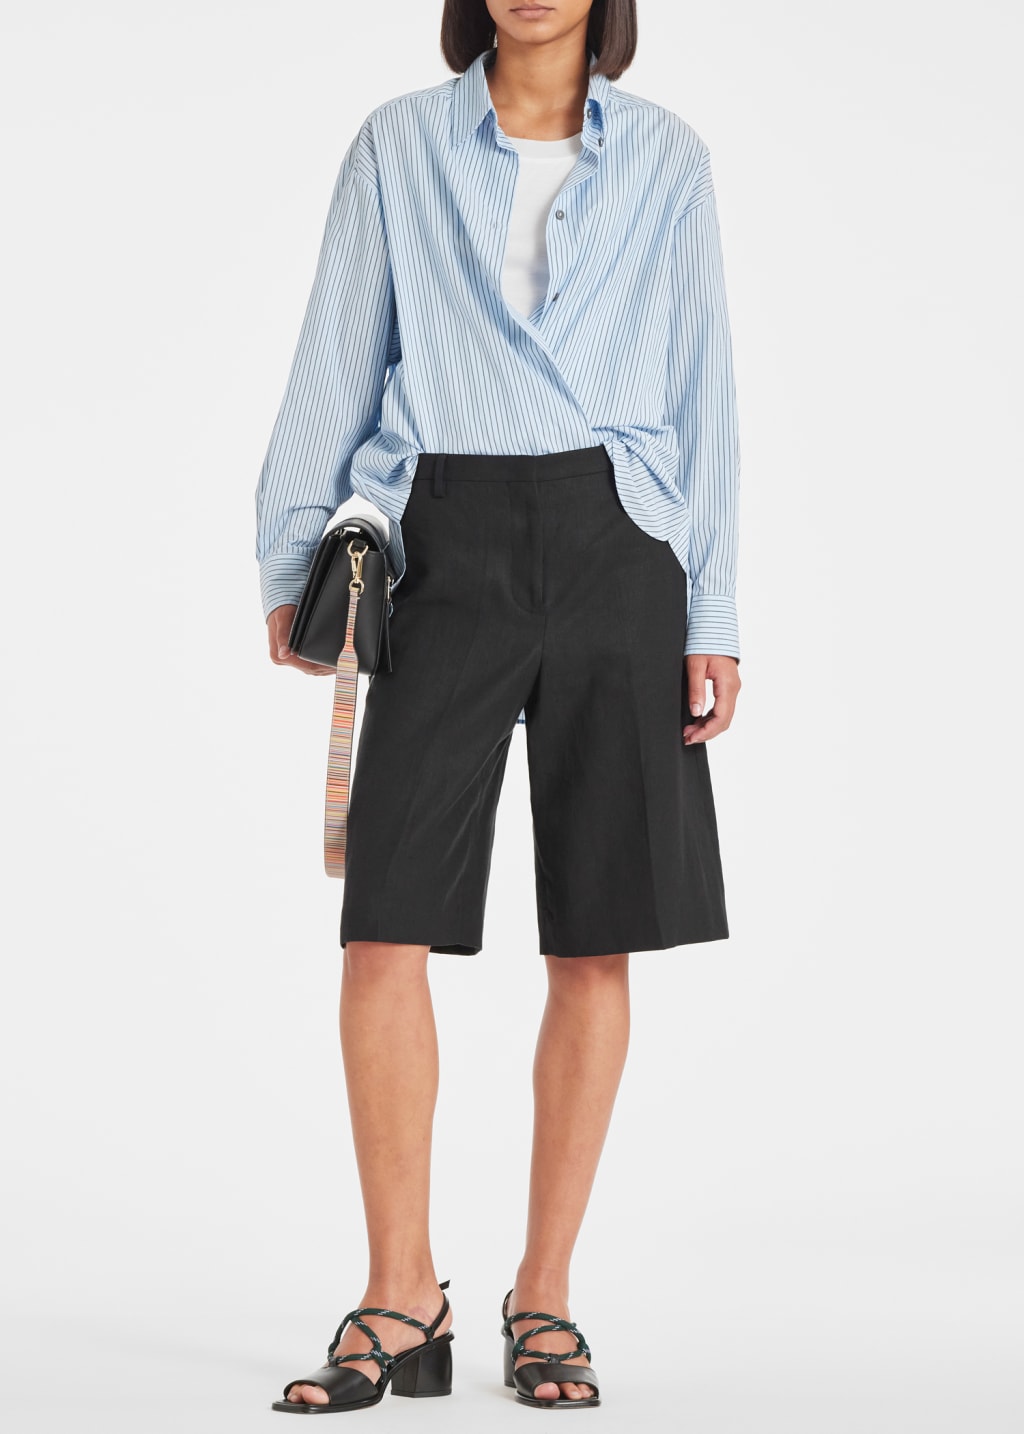 Model View - Black Linen Tailored Shorts Paul Smith